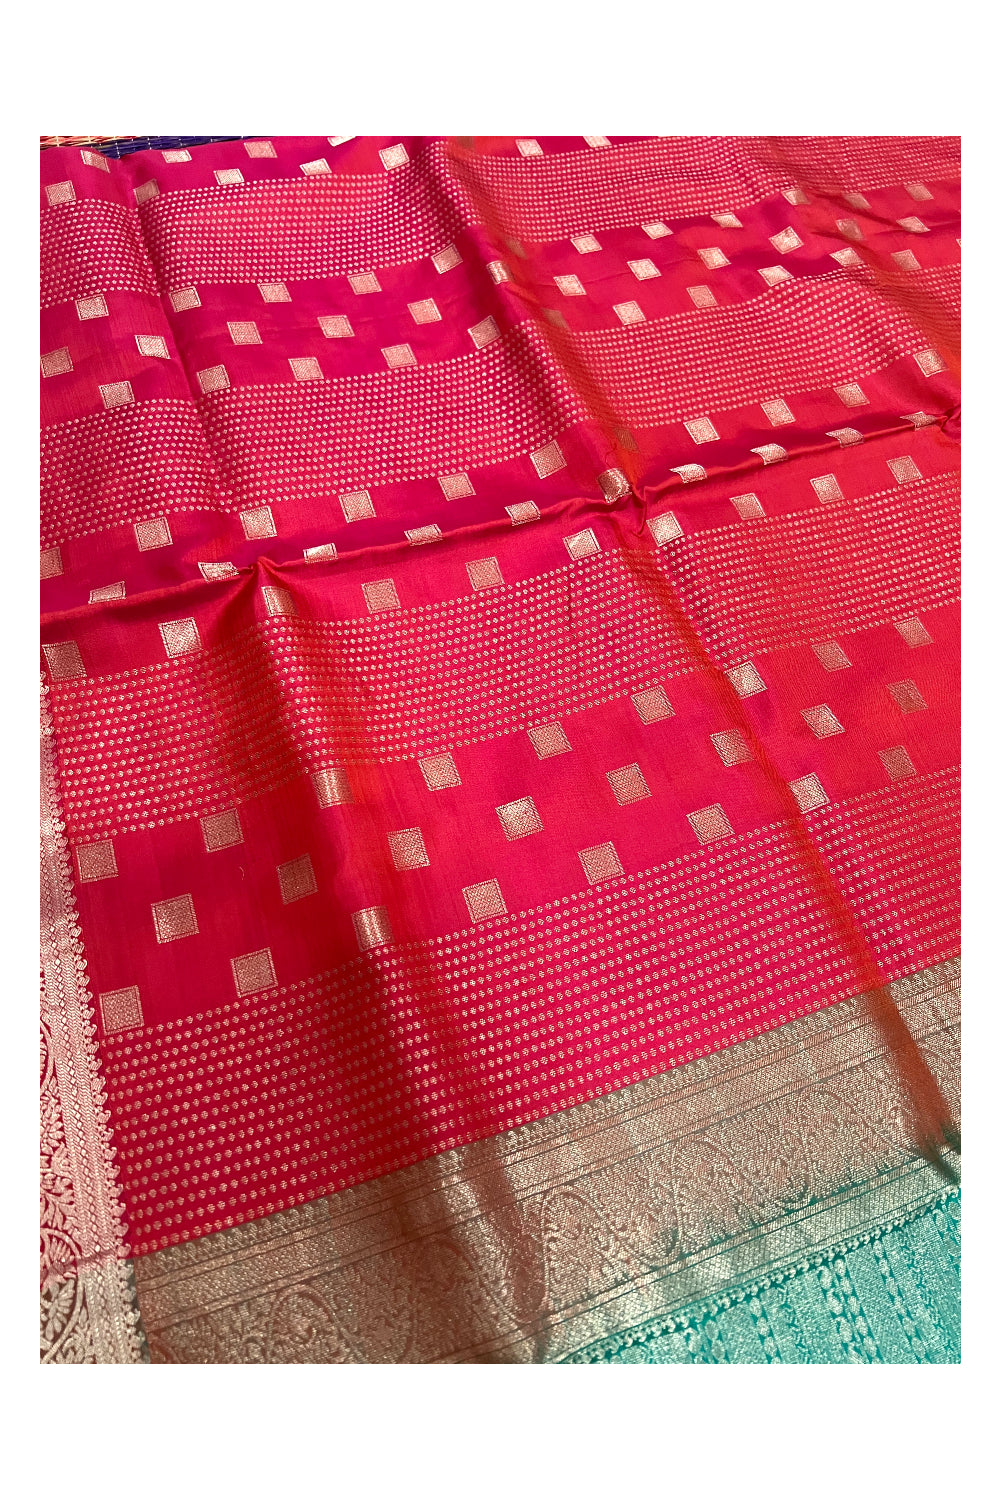 Southloom Handloom Pure Silk Kanchipuram Saree with Red Body and Green Blouse Piece